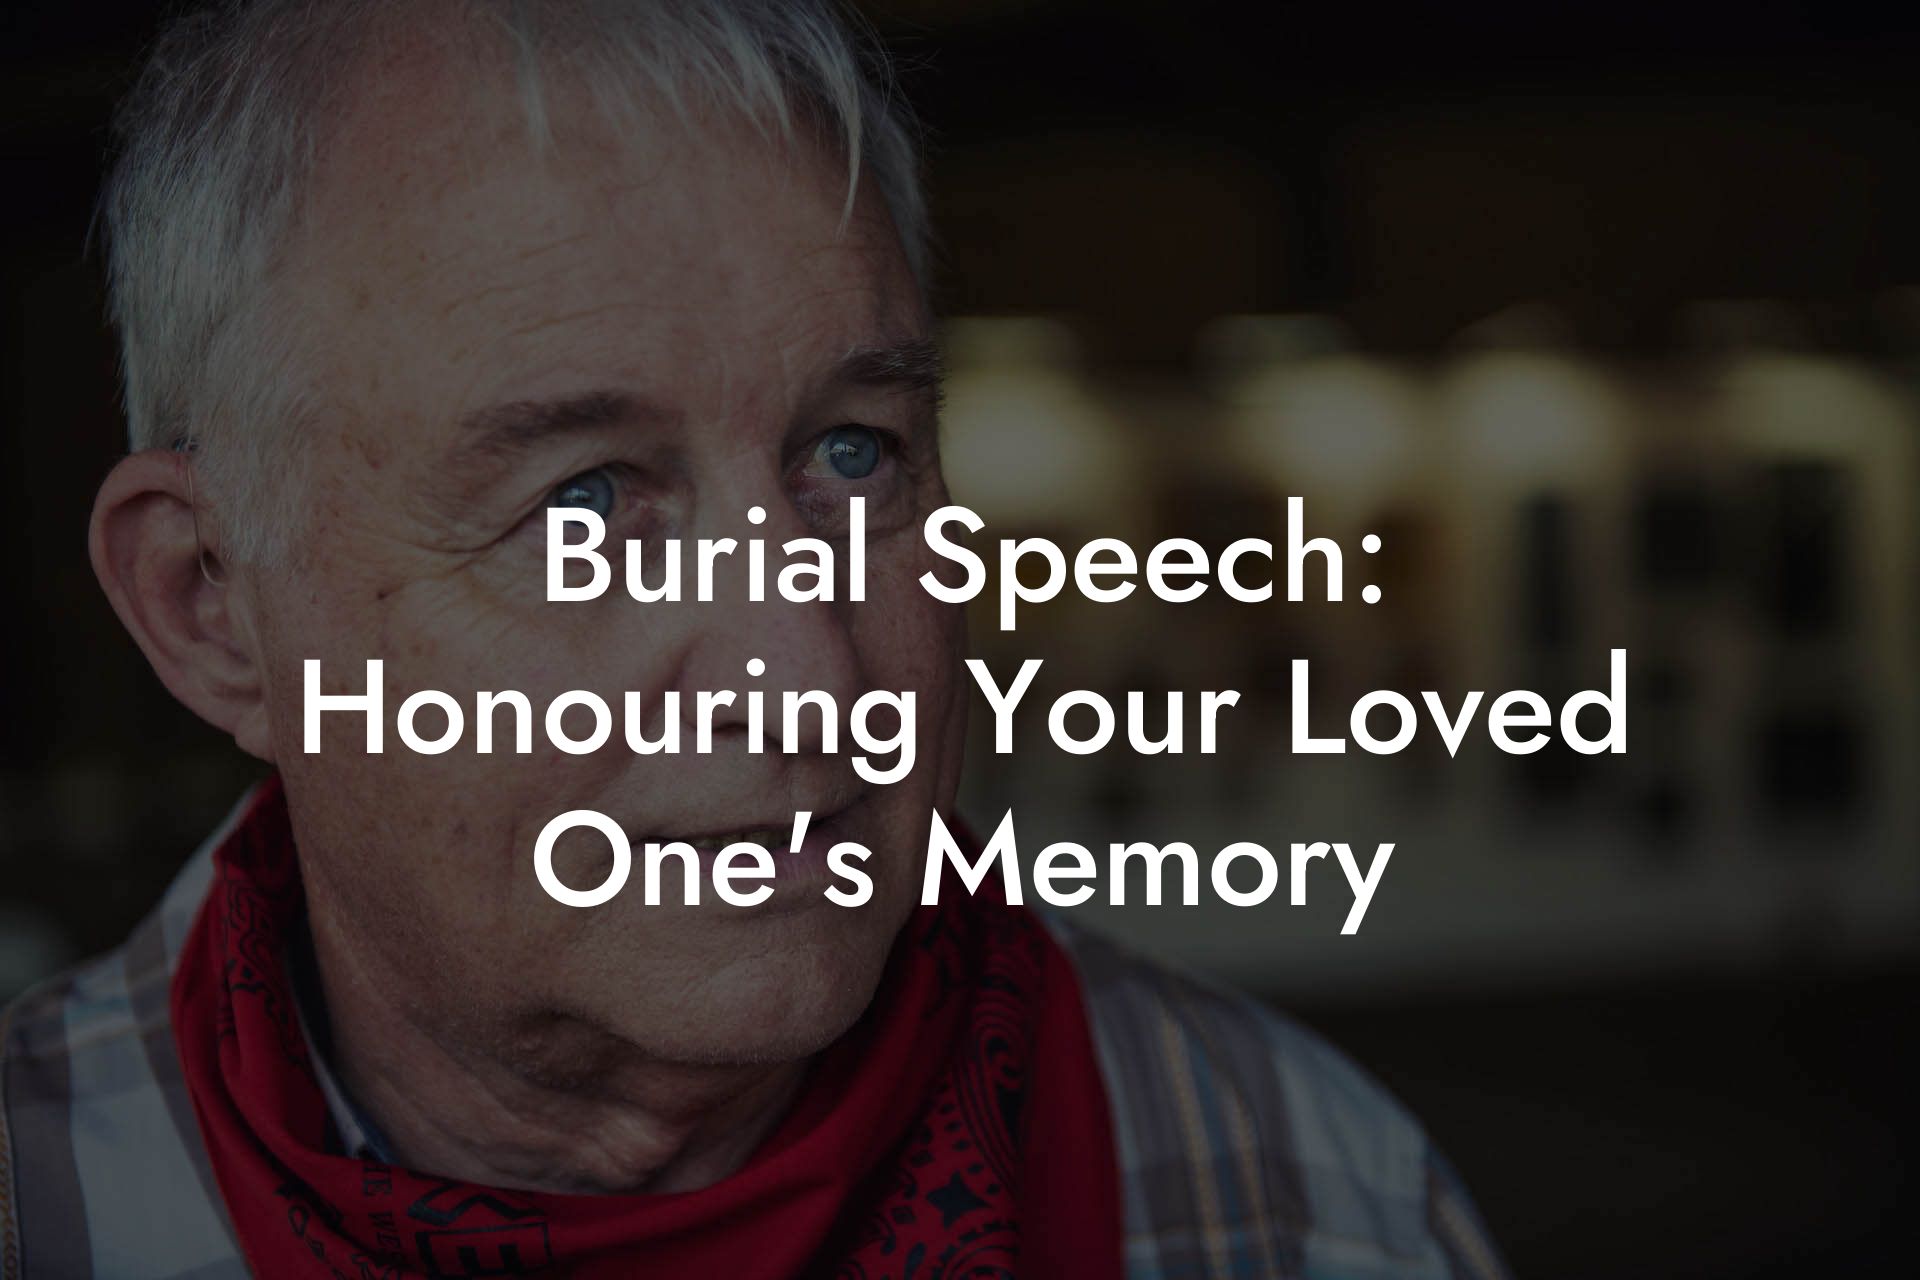 Burial Speech: Honouring Your Loved One's Memory